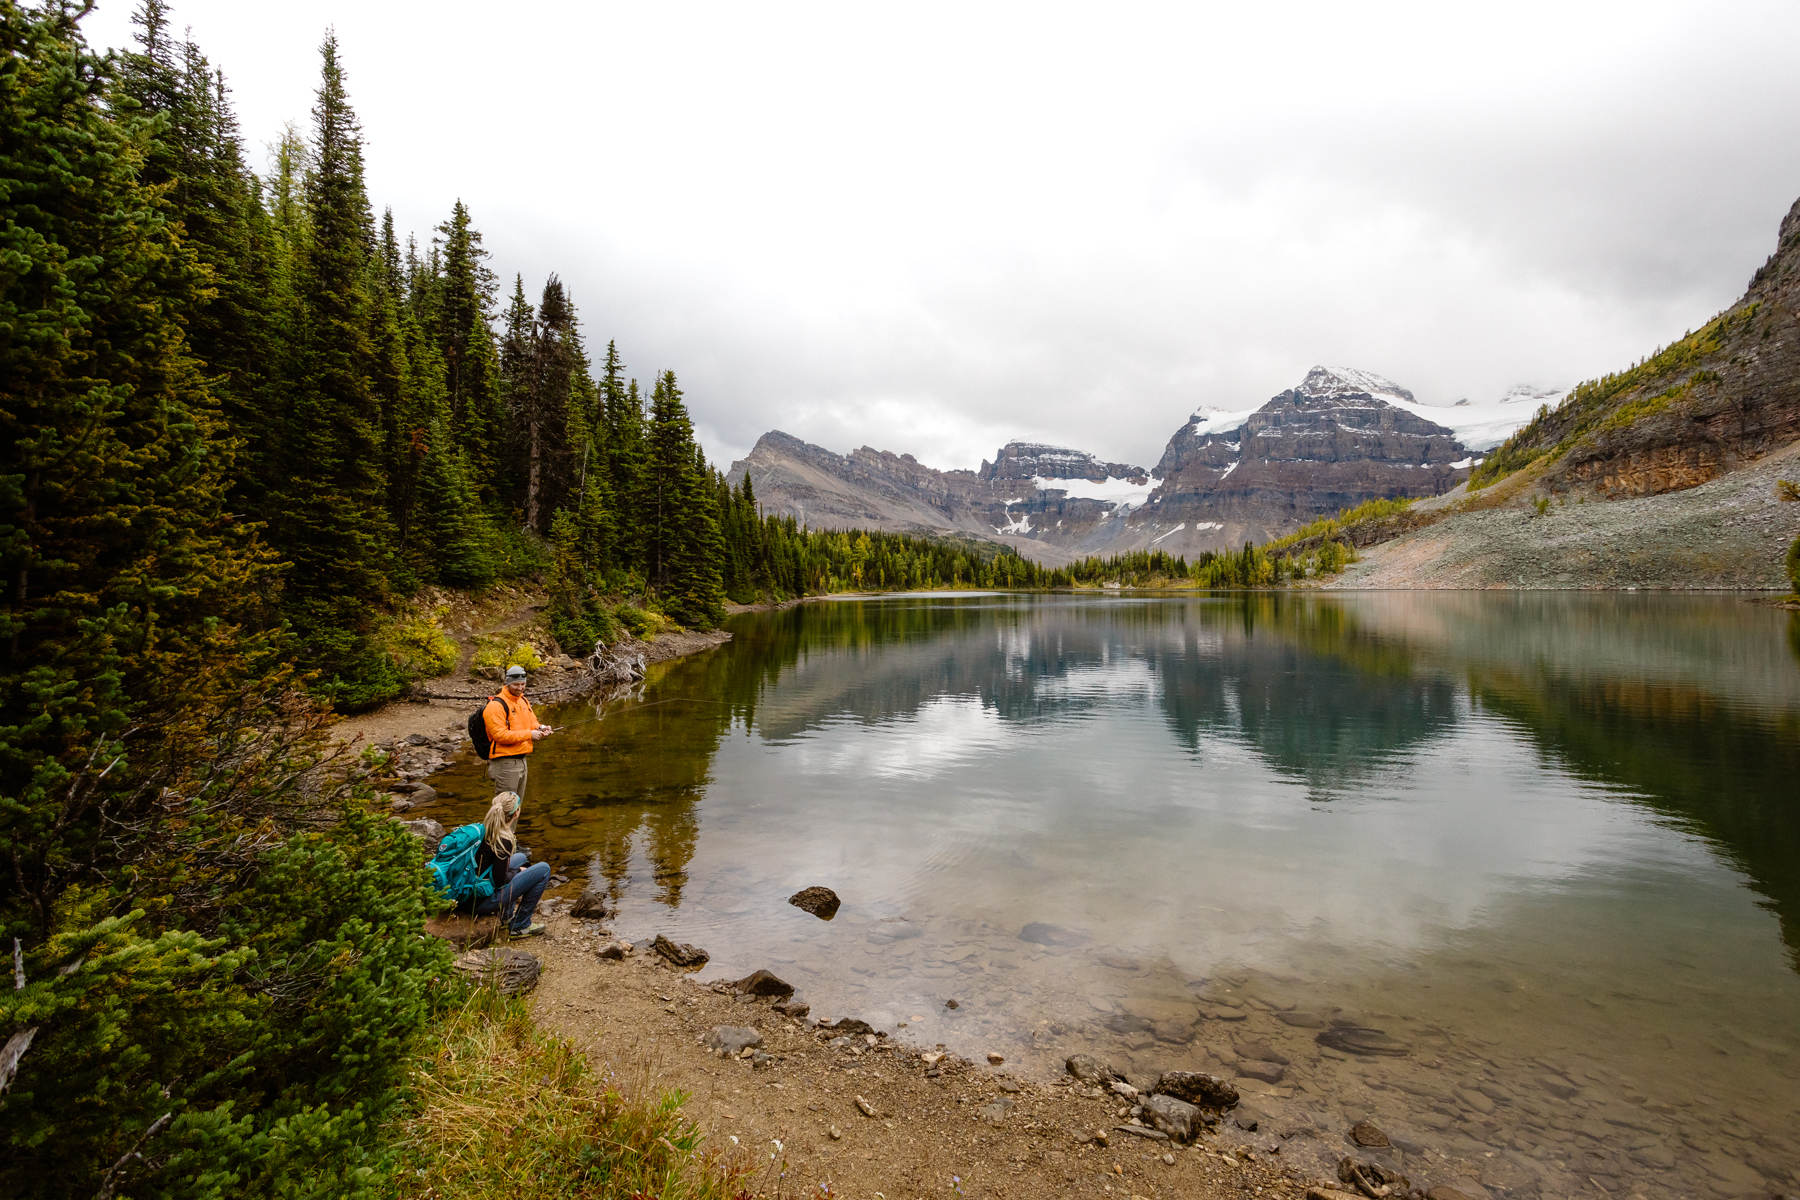 Mount Assiniboine Elopement Photographers at a Backcountry Lodge - Photo 65